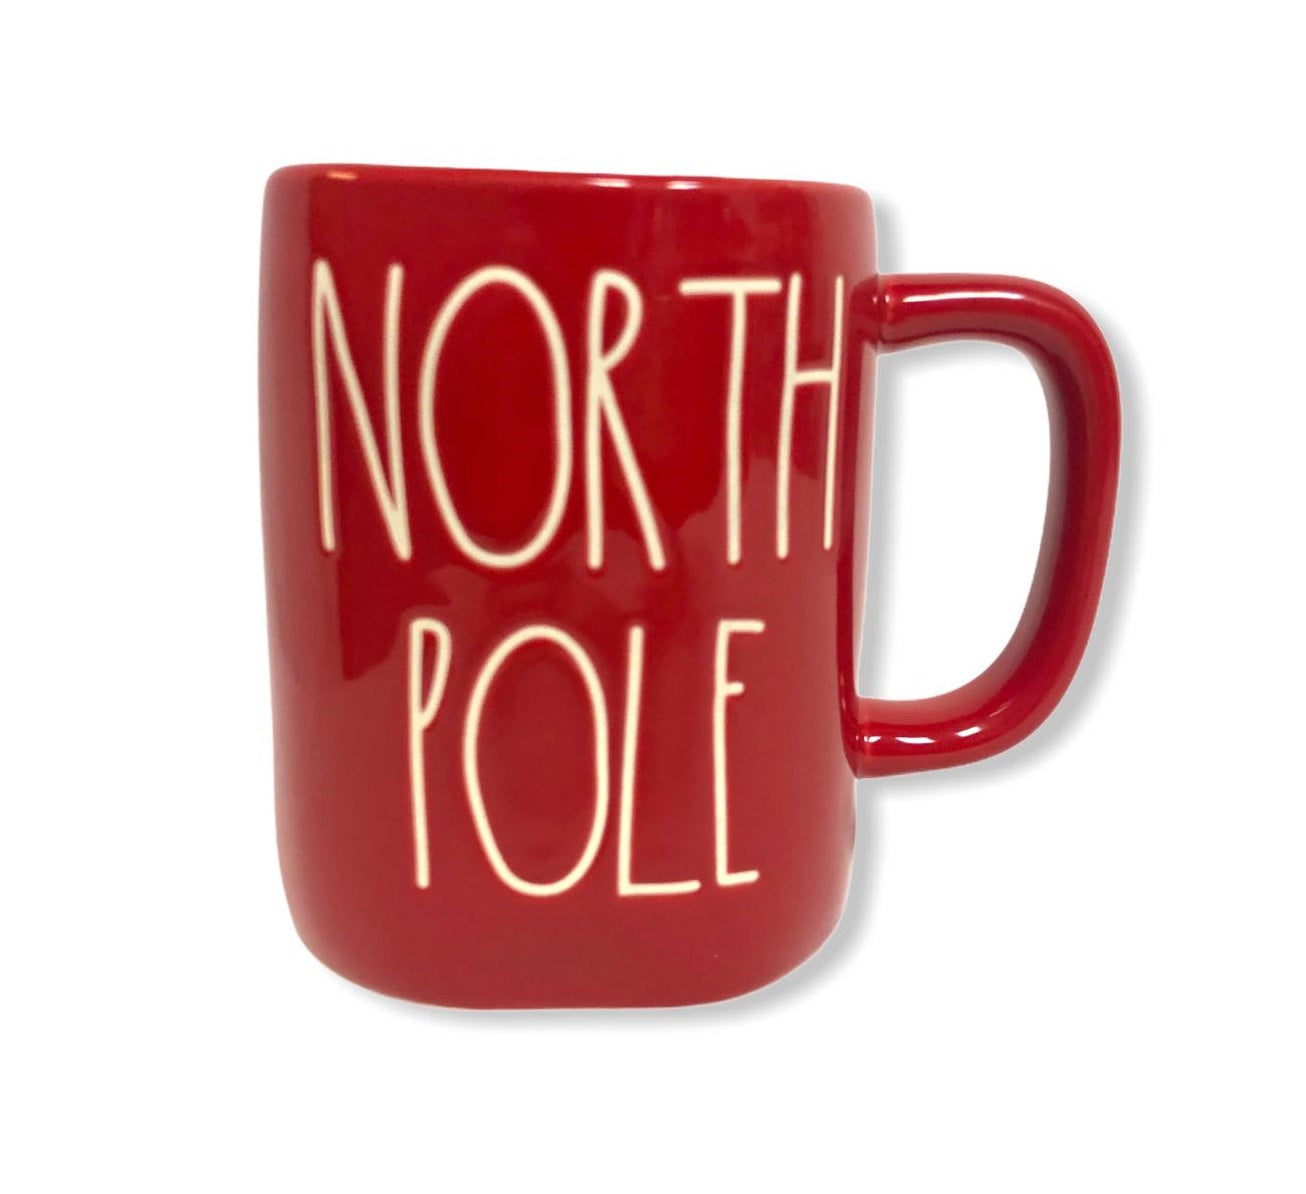 Rae Dunn Red NORTH POLE Coffee Mug with White LL Letter